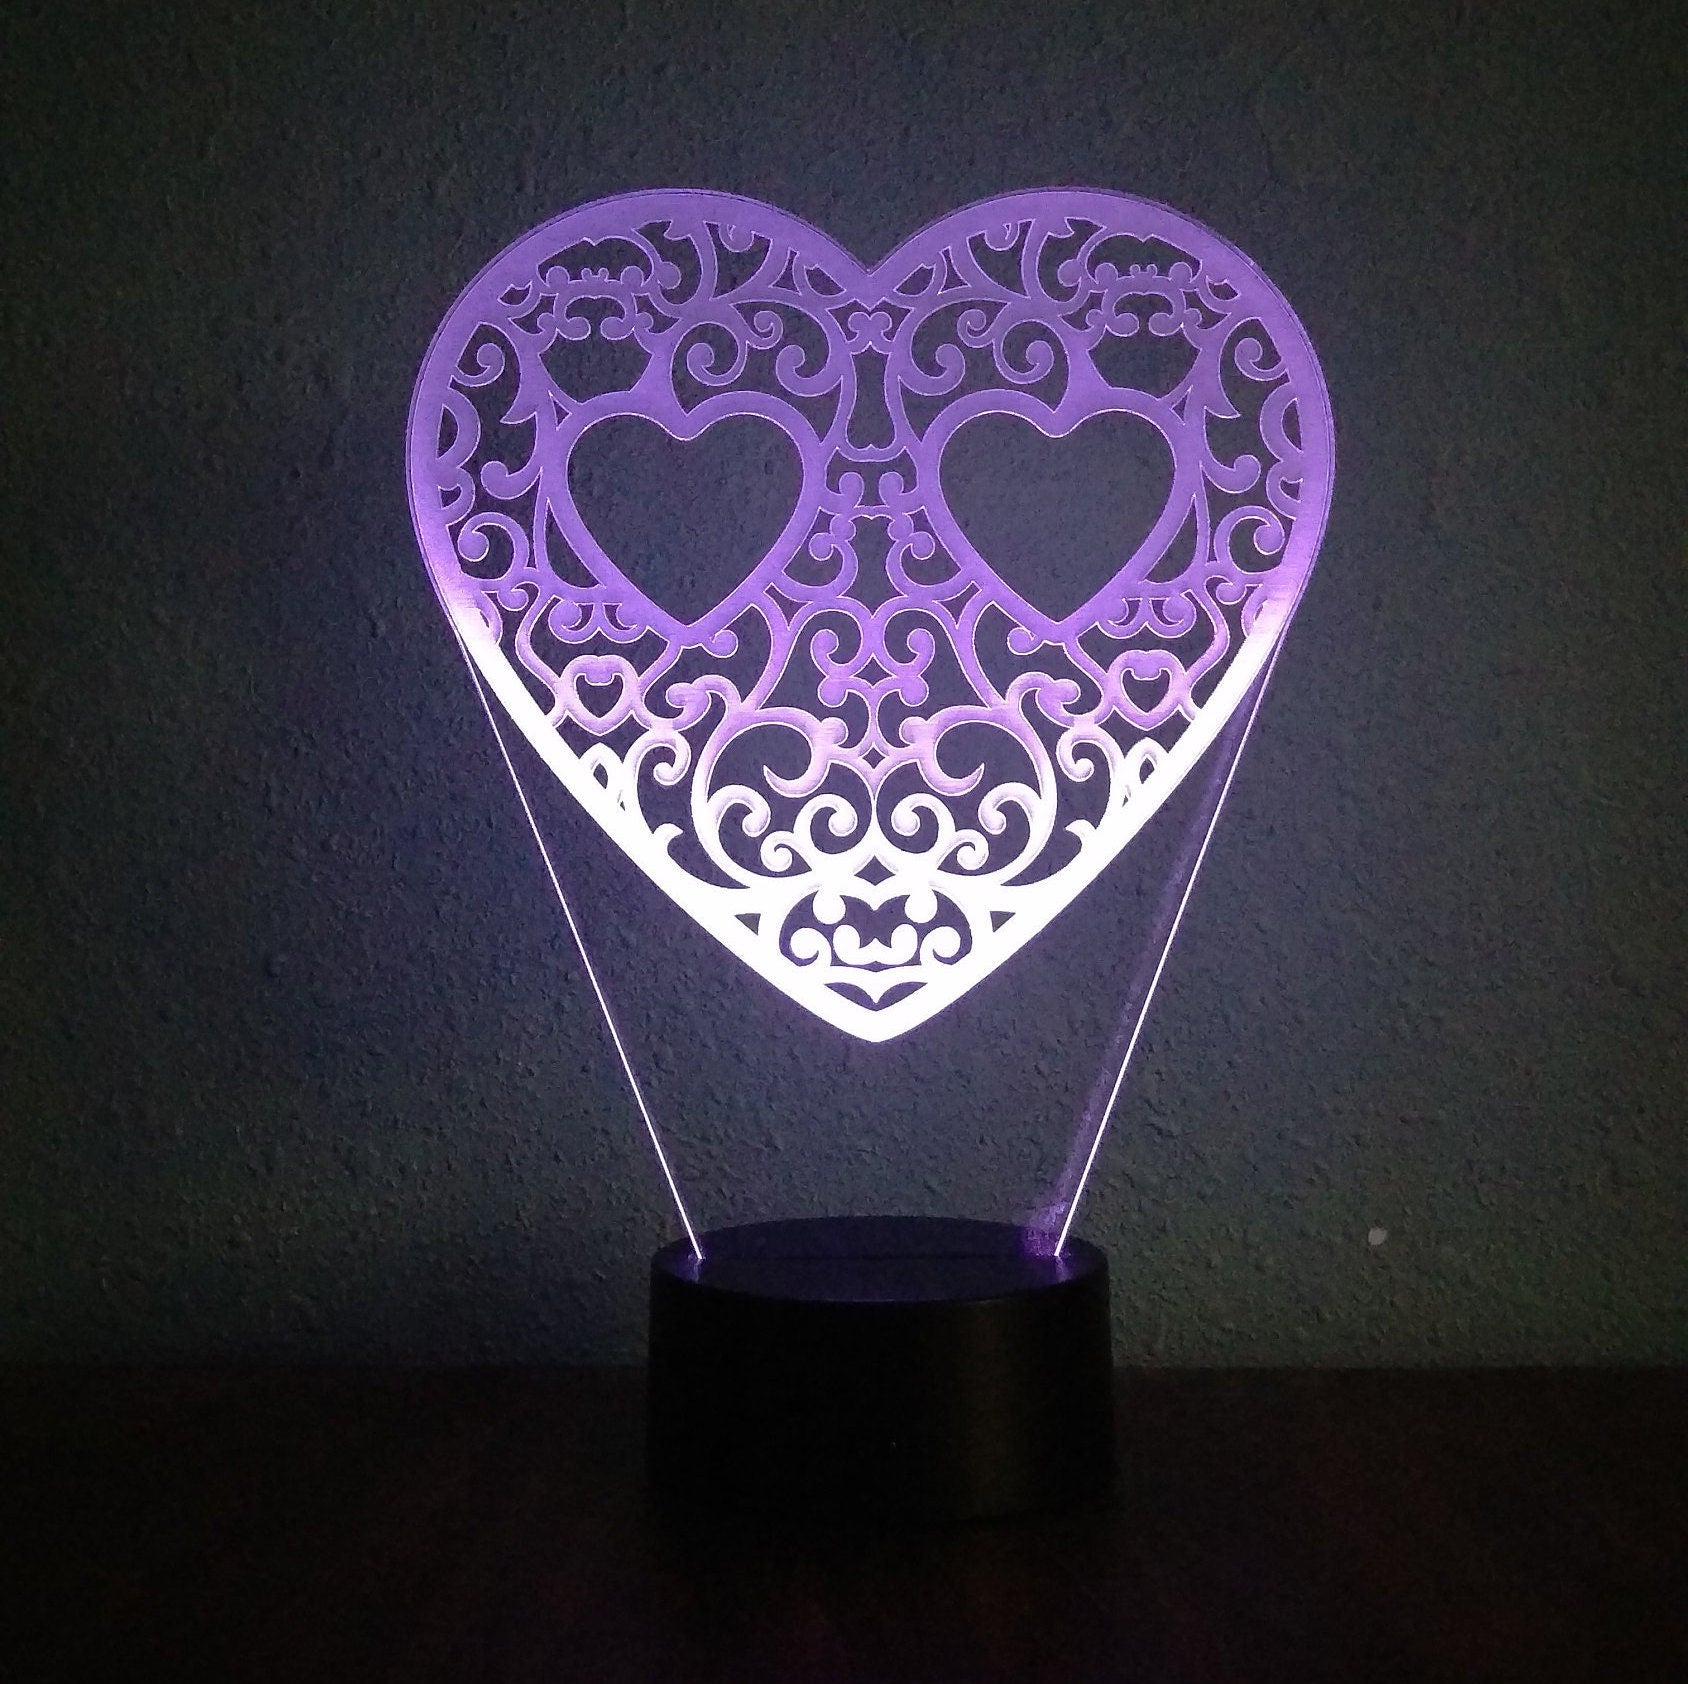 Awesome "Two Hearts in a Heart" LED Lamp (1021) - FREE SHIPPING!